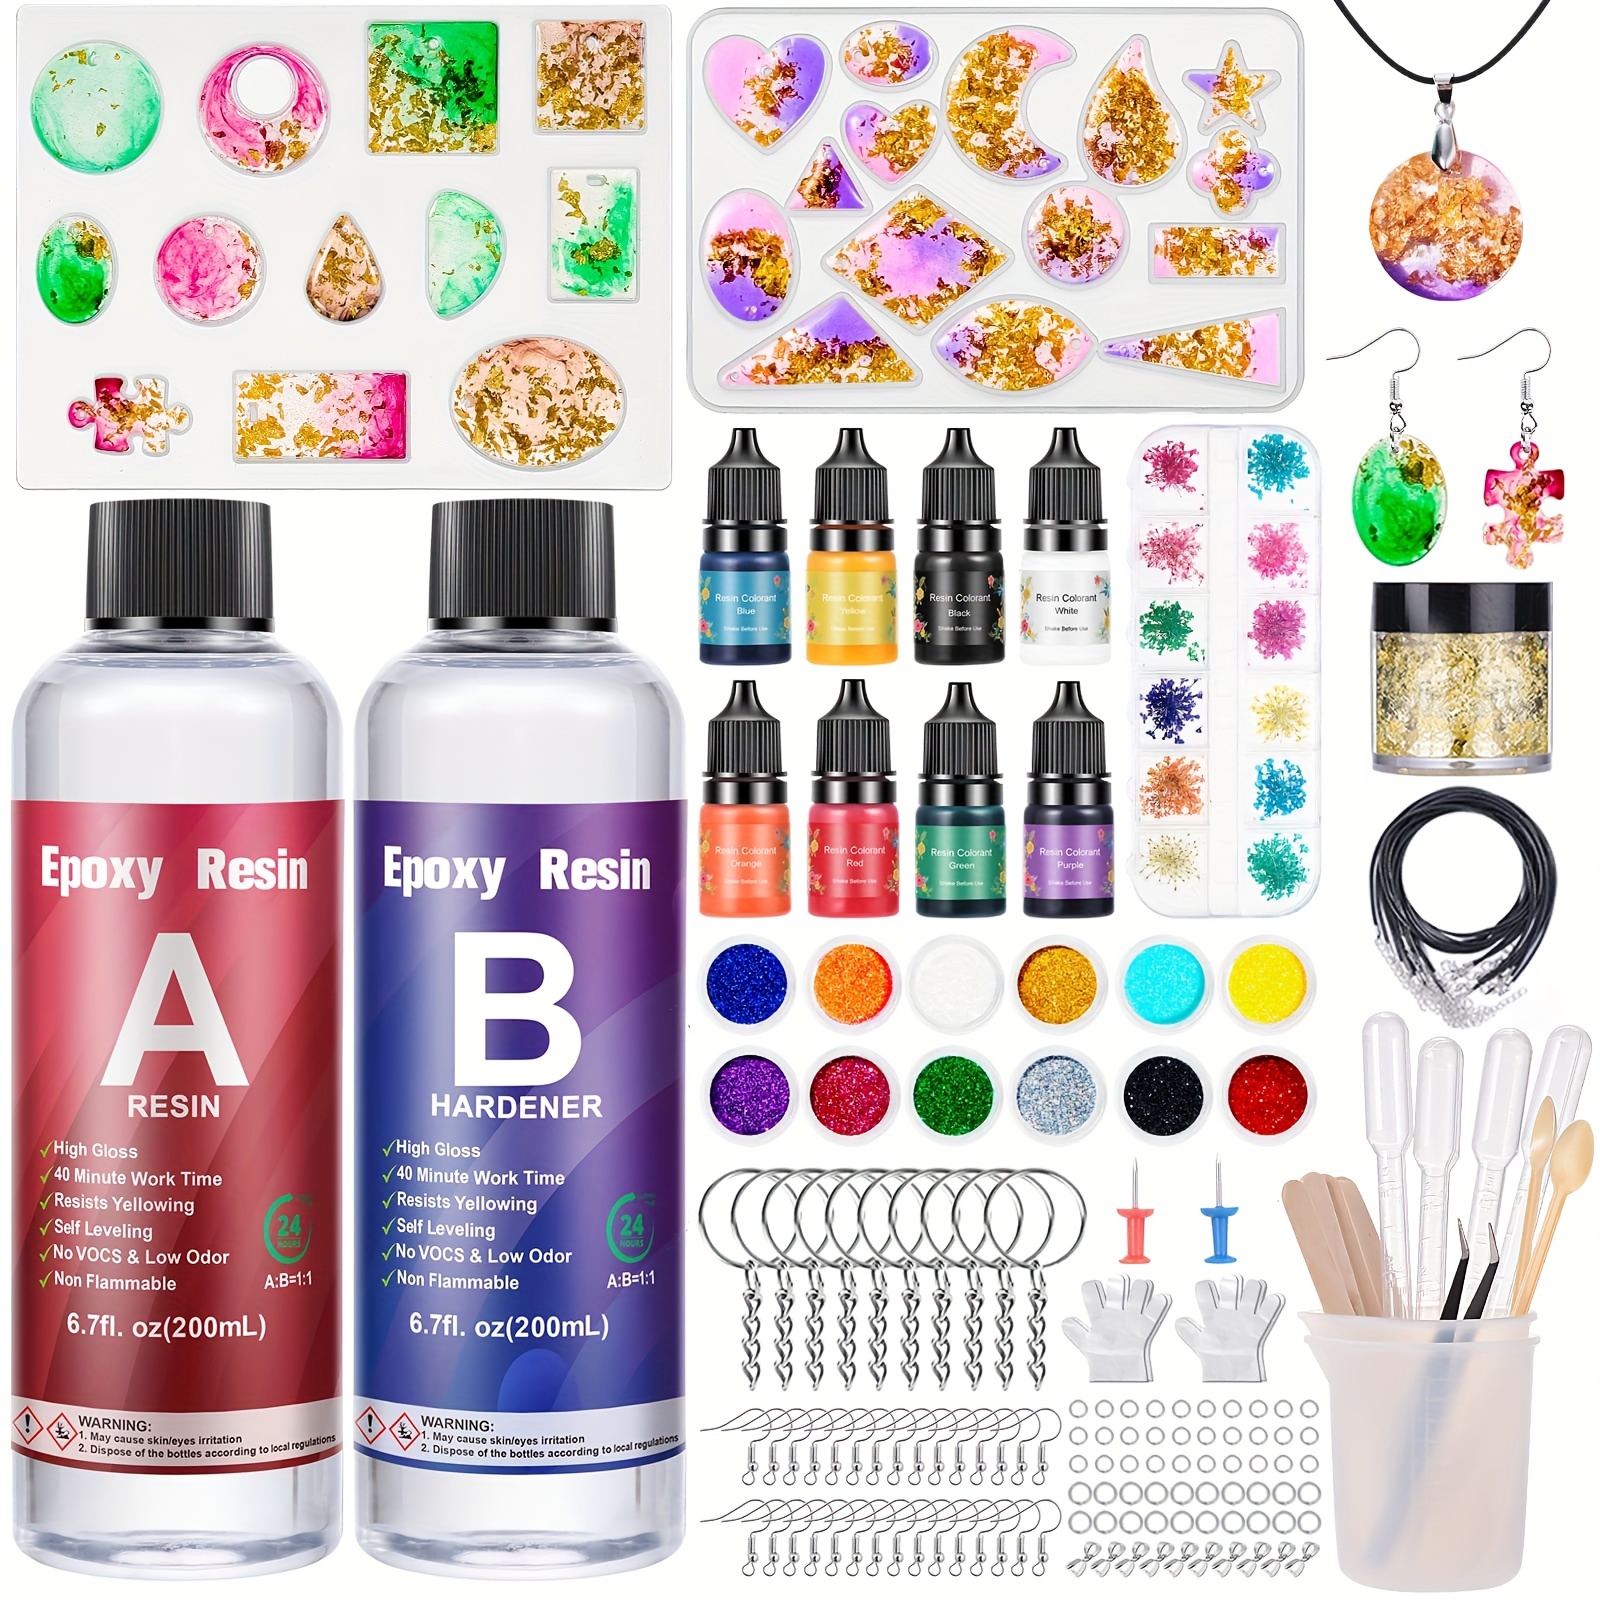 

Clear Epoxy Resin 2 Parts 400 Ml Complete Epoxy Resin Kit With Epoxy Resin Mould, Epoxy Resin Dye, Glitter, Gold Leaf, 1:1 Ratio For Jewellery Making, Necklace, Key Ring